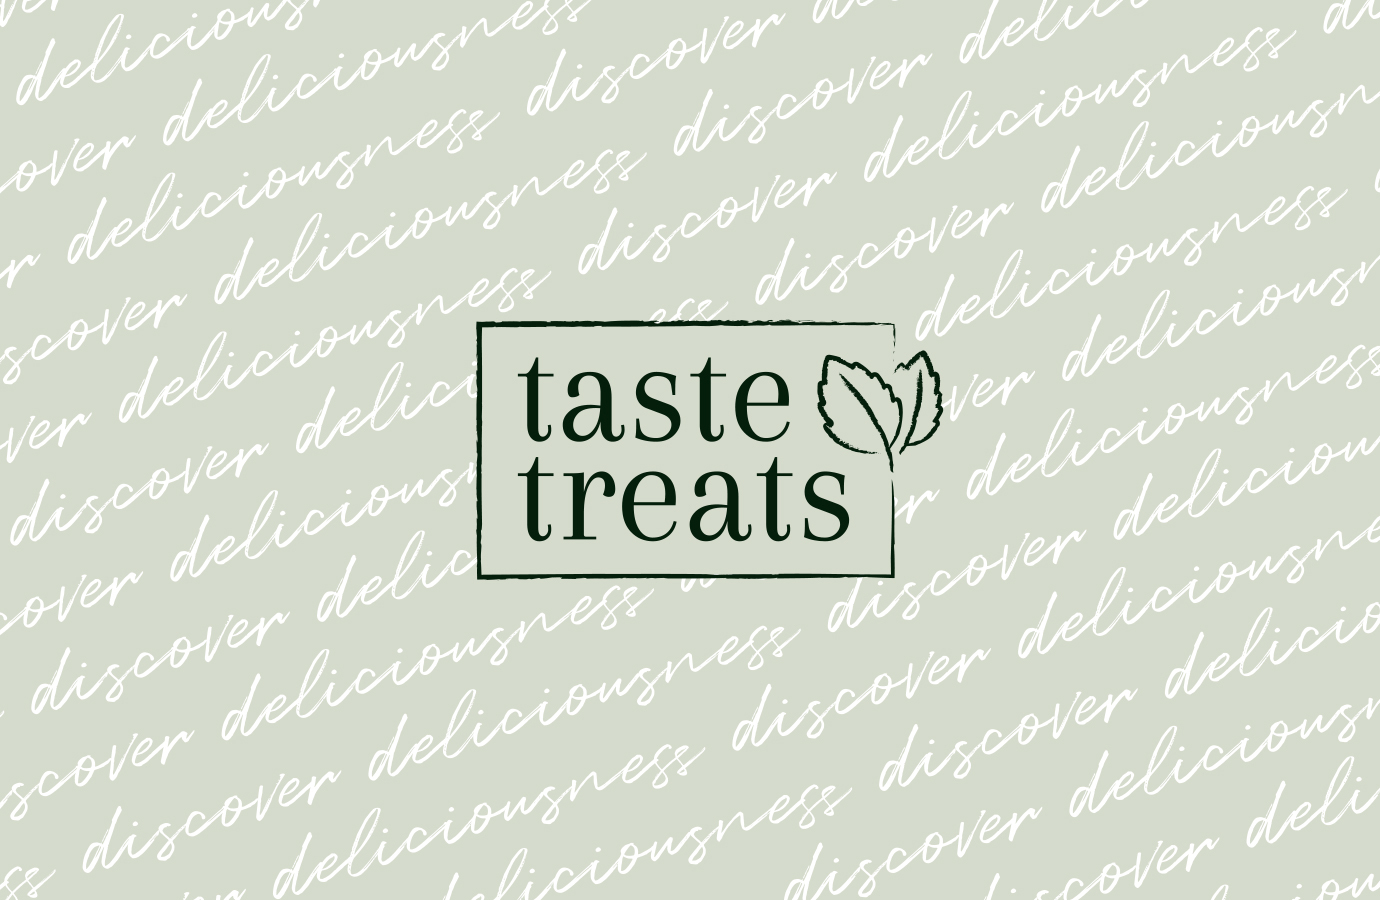 Taste treats cover fade front